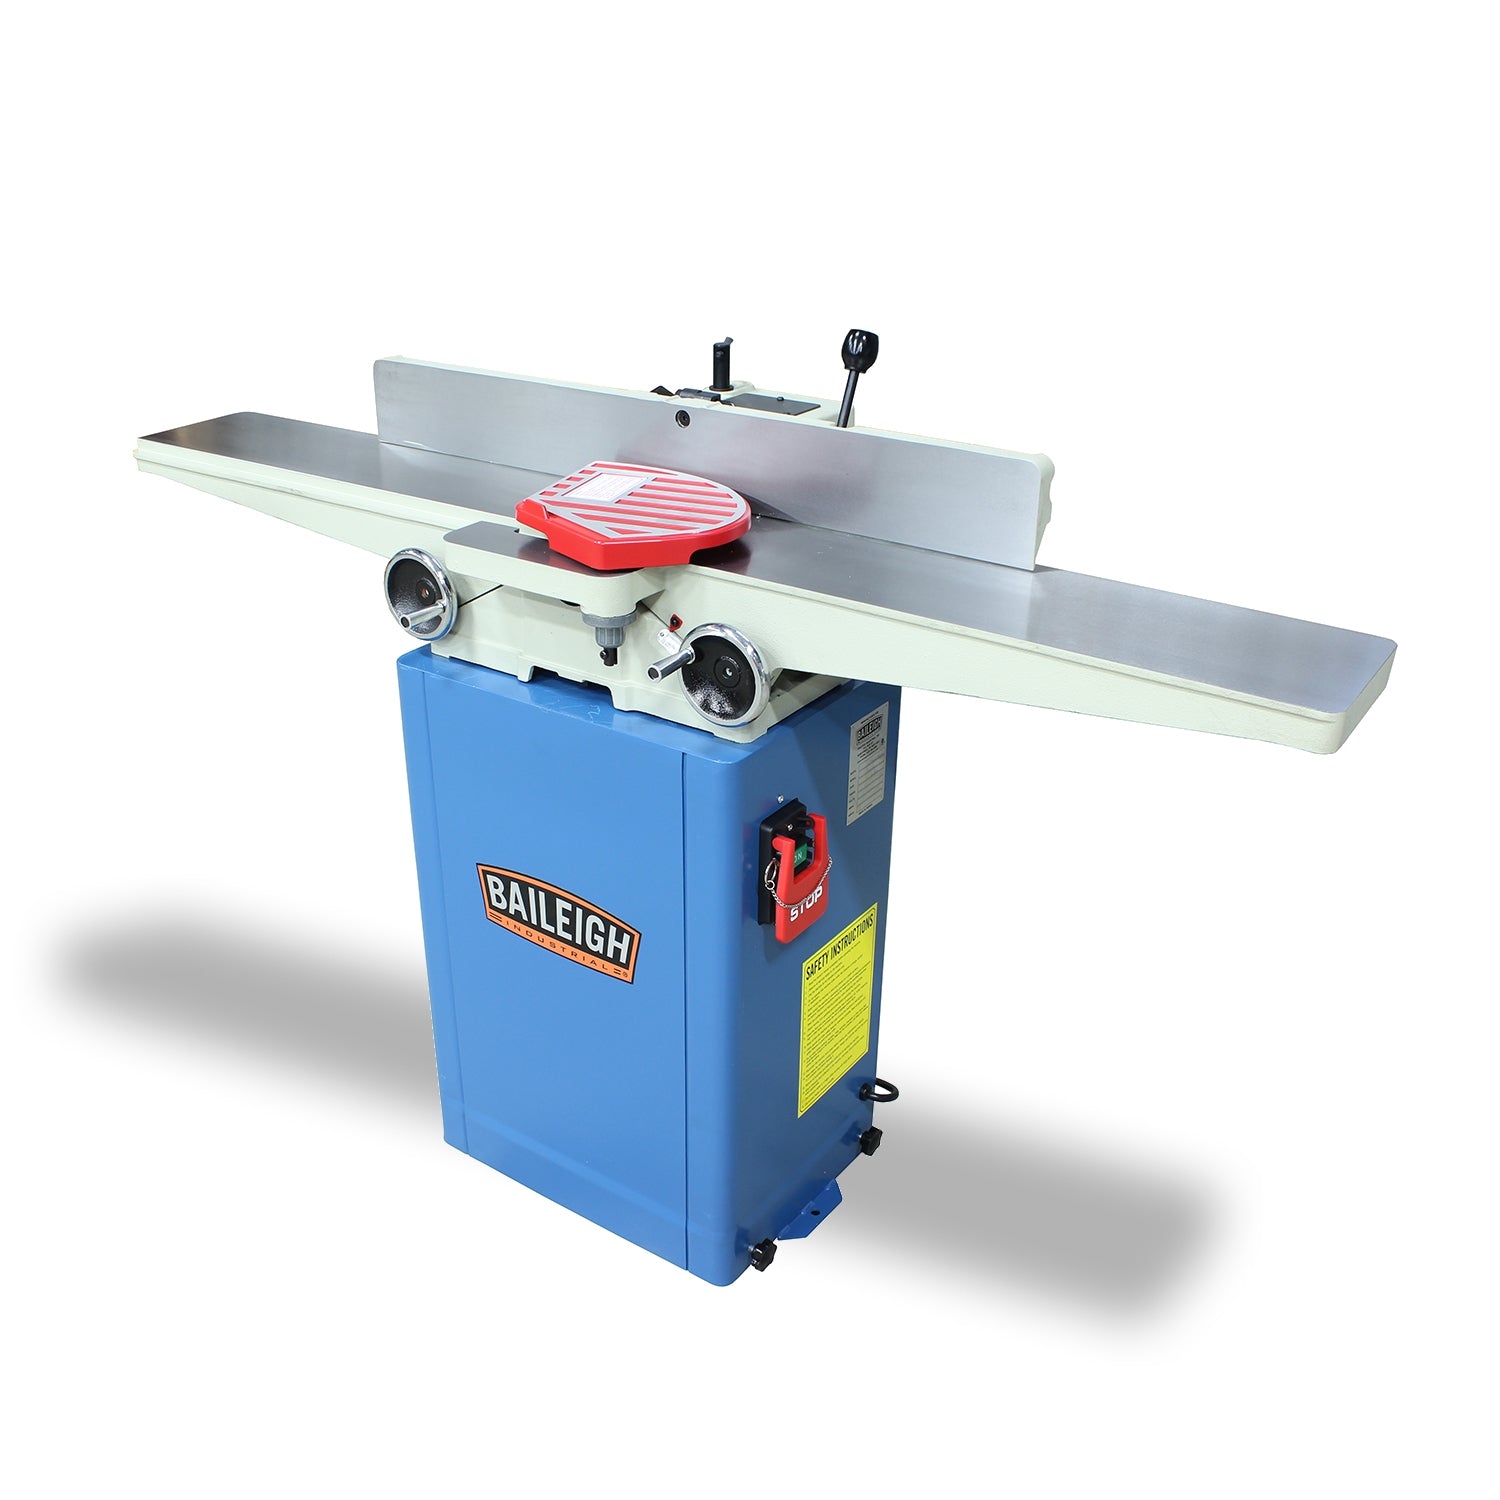 Baileigh IJ-655-HH-1.0 110/220V (Prewired 110v) 1hp 6" Jointer, 55" Table, 5000 rpm, 2-1/2" Helical Insert Cutter Head